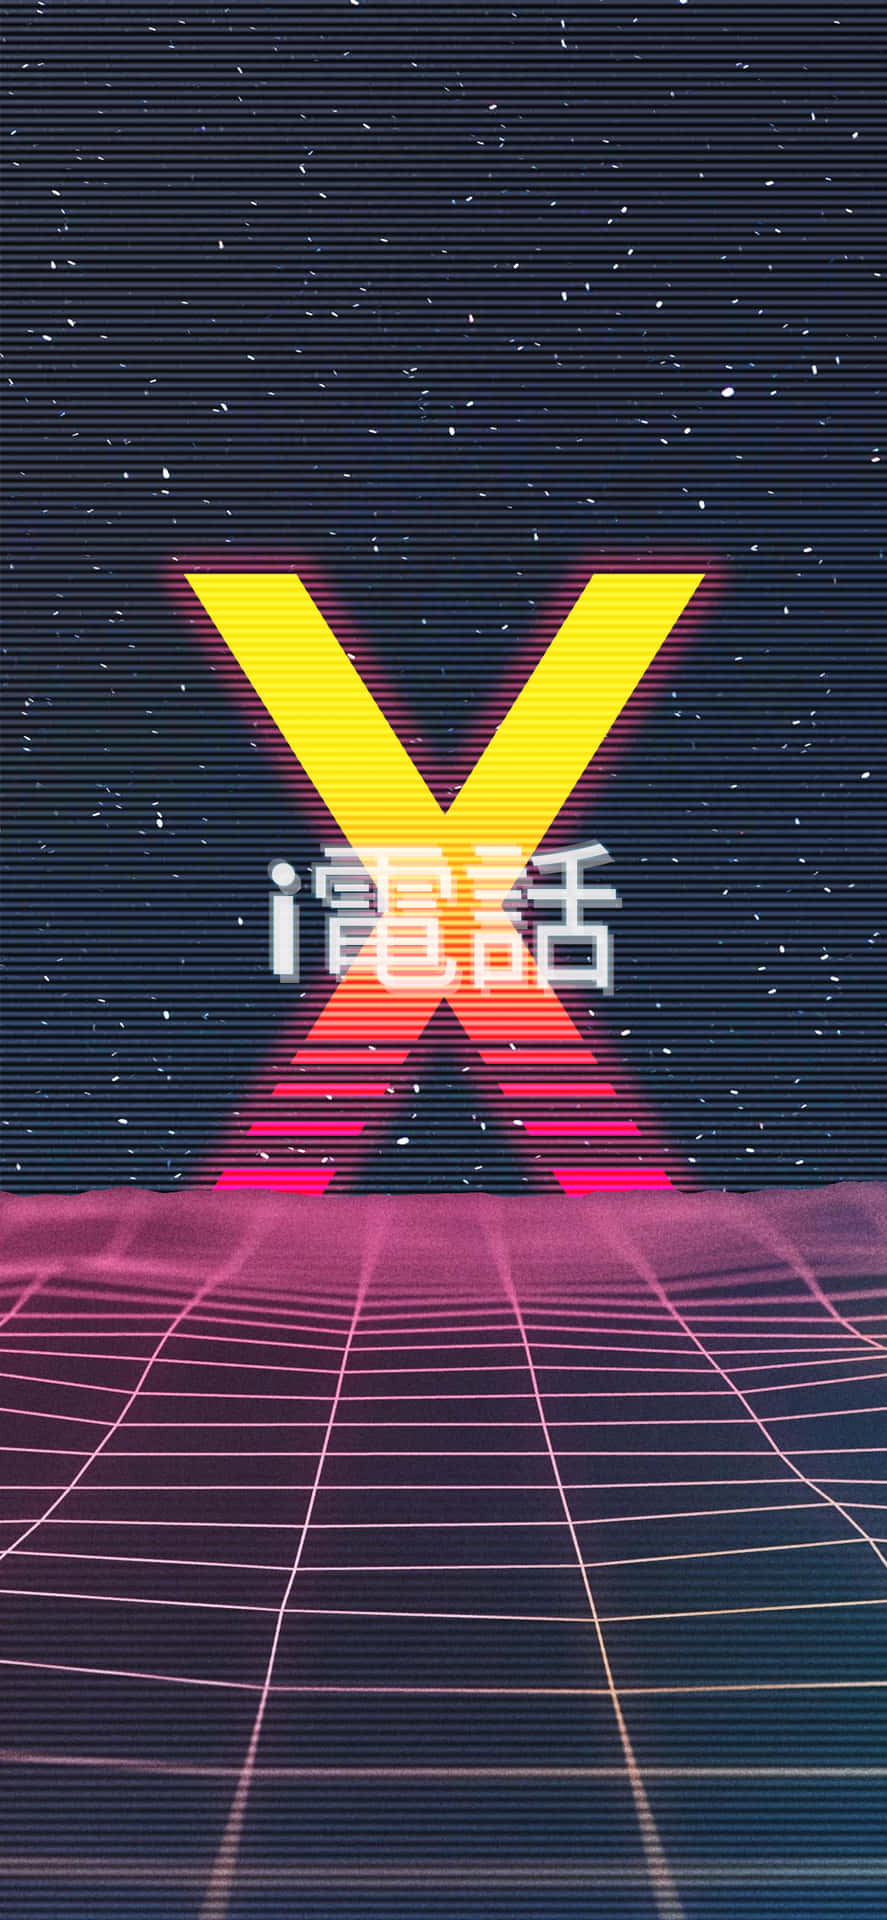 Get Your Groove On with this One-of-a-Kind Vaporwave Iphone Wallpaper